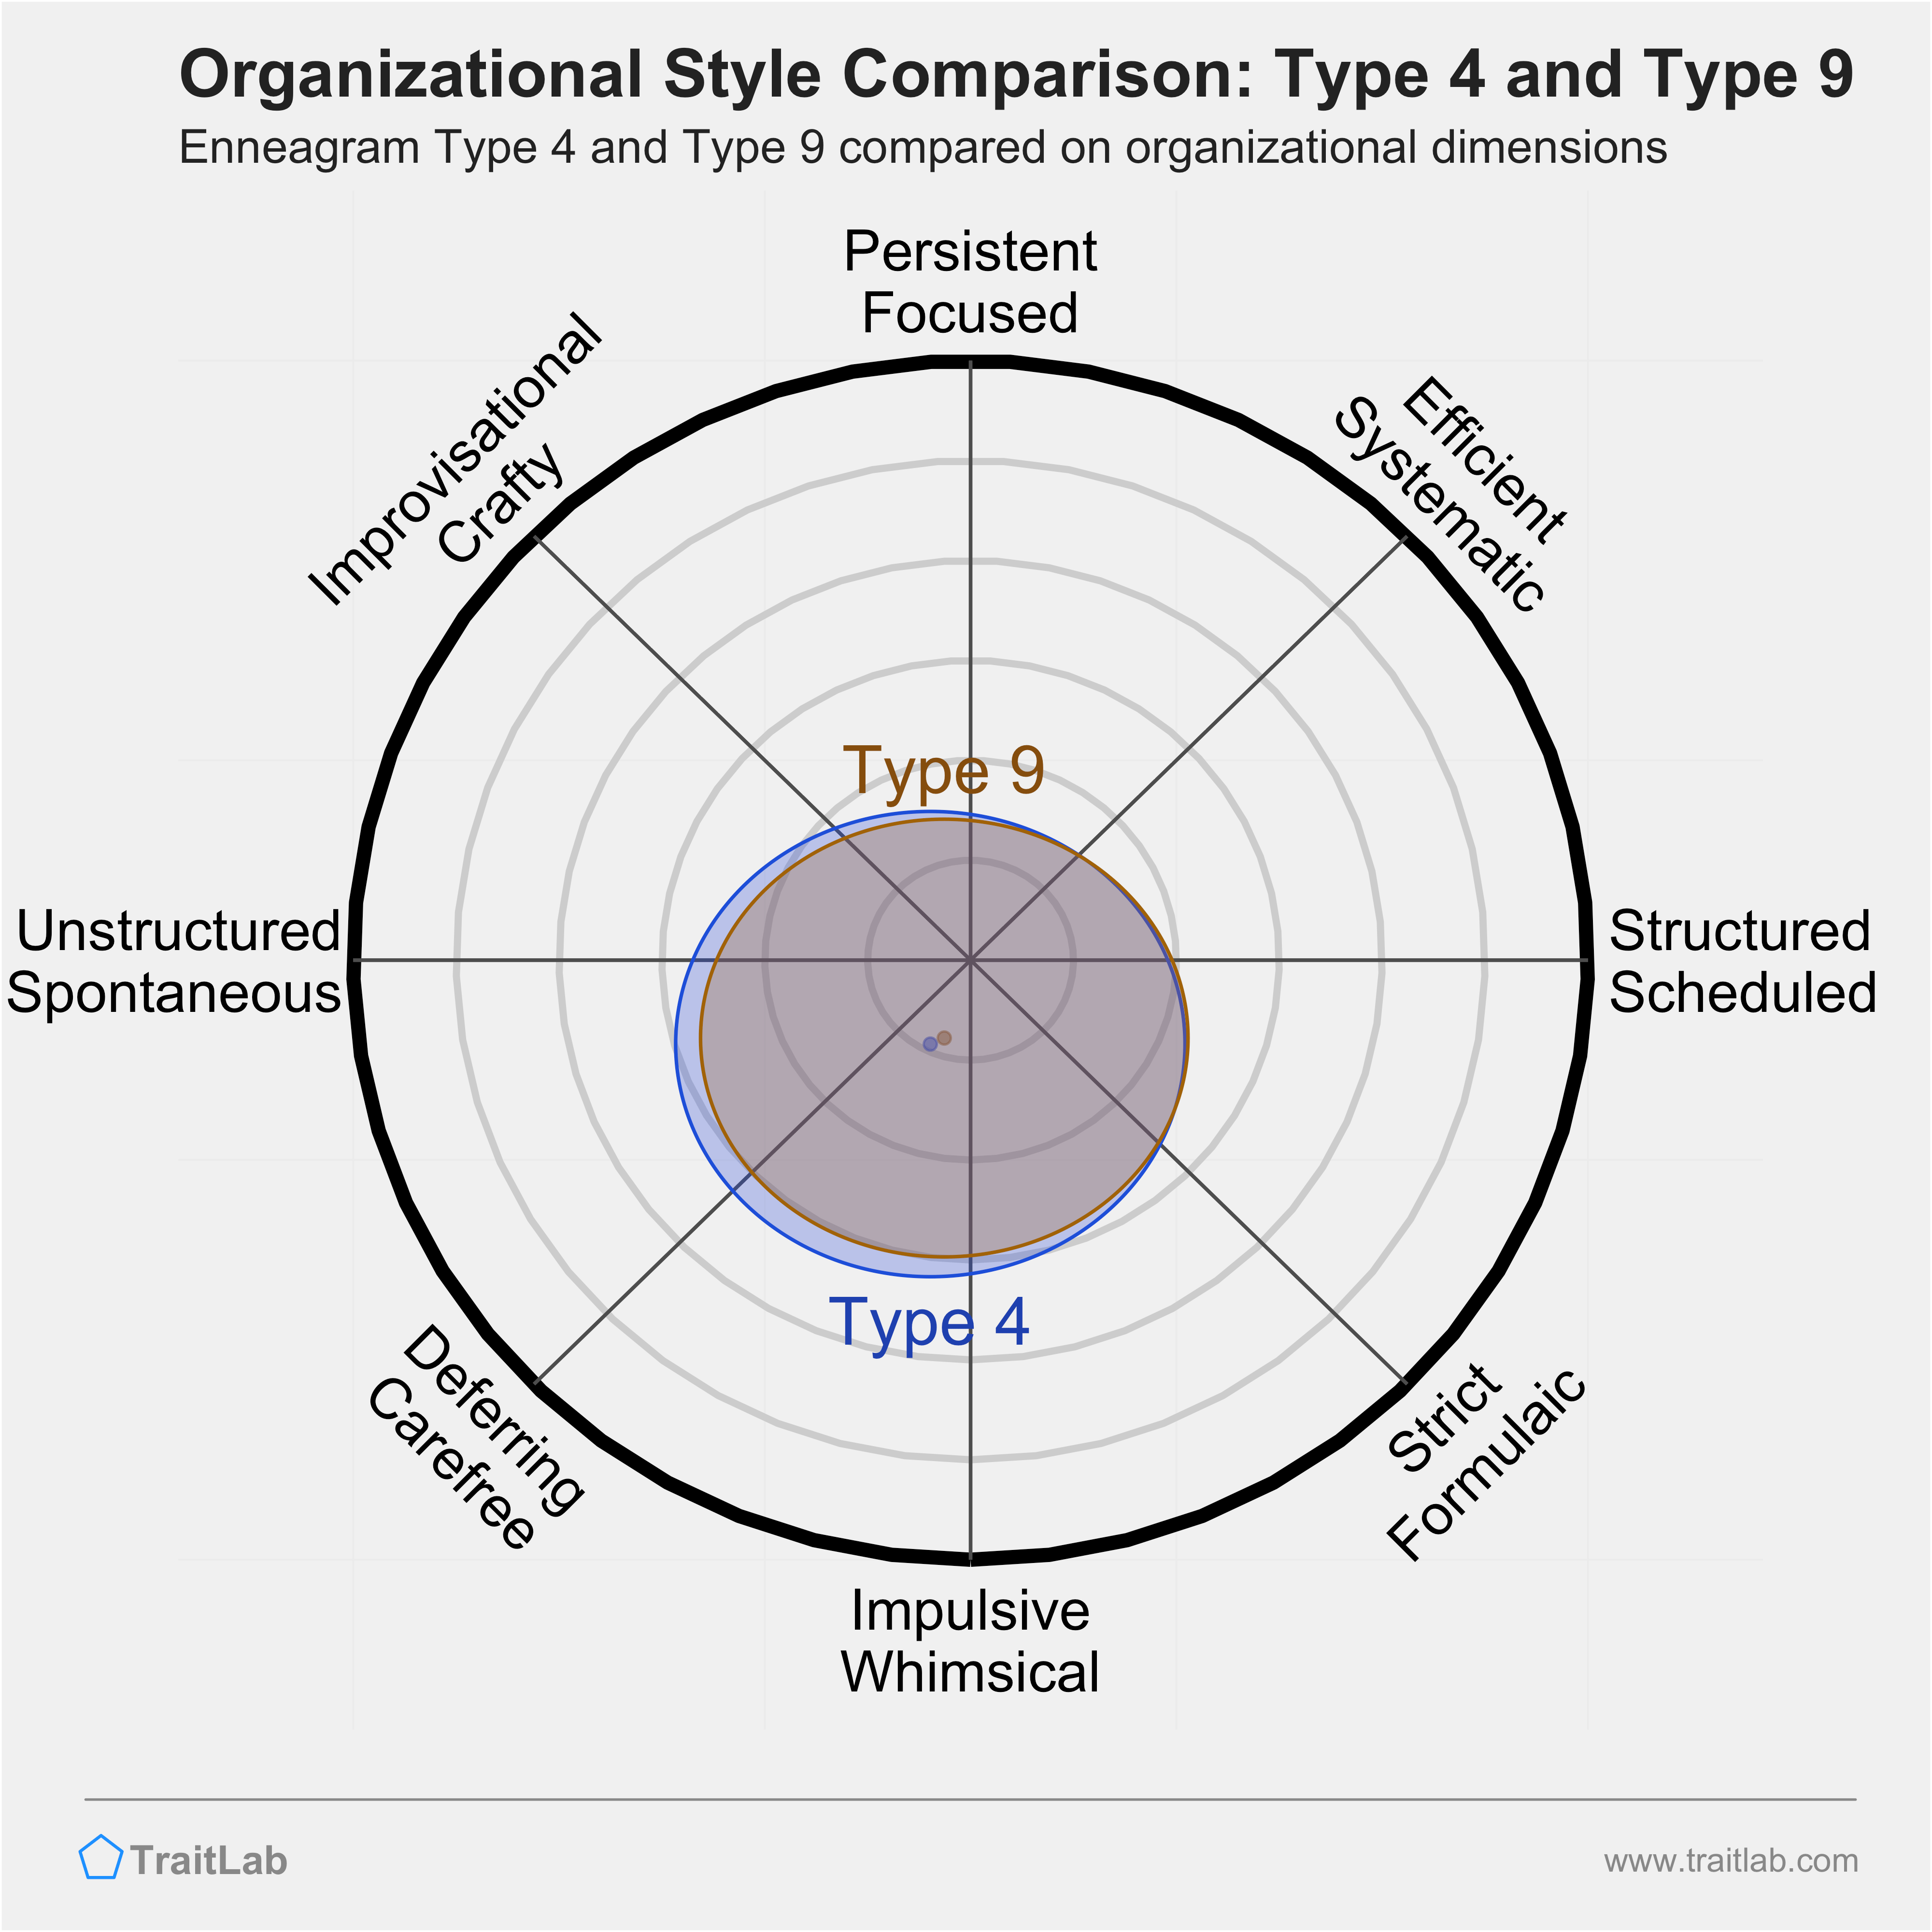 Type 4 and Type 9 comparison across organizational dimensions